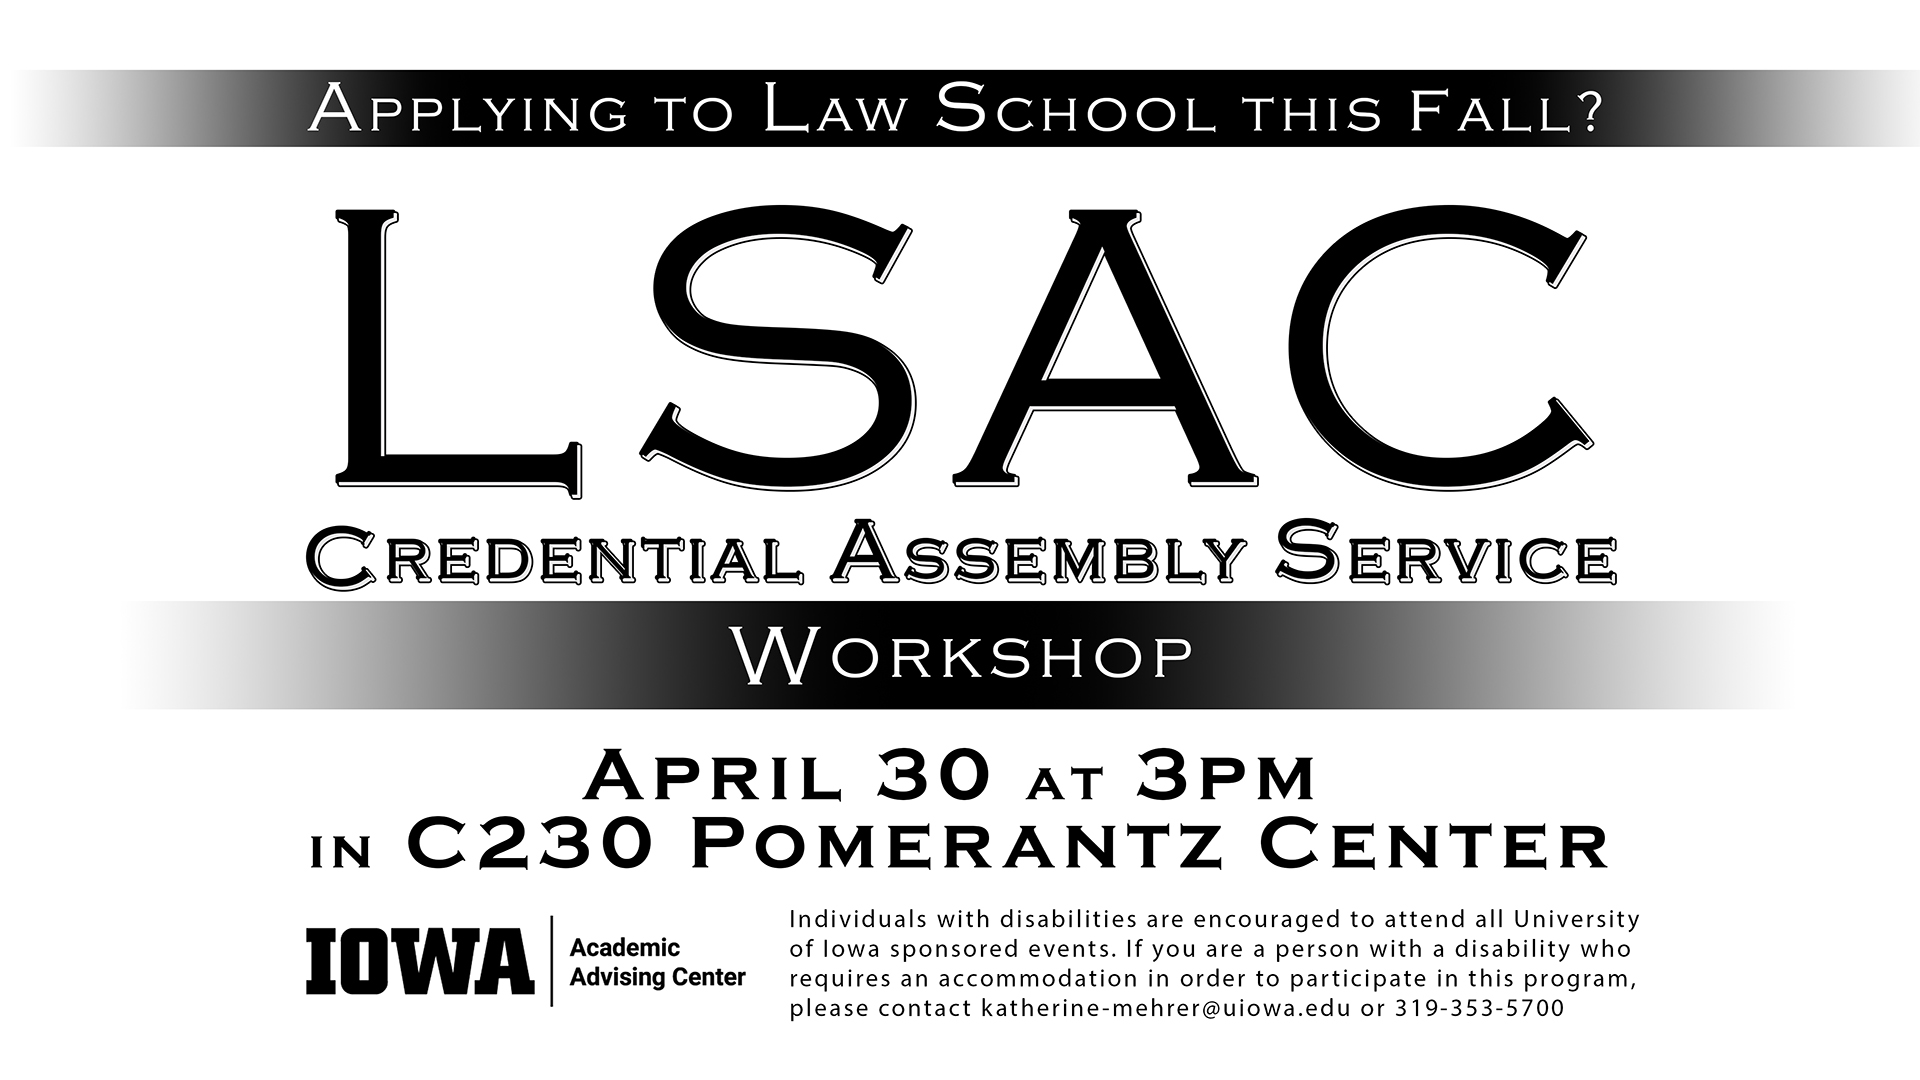 flyer for LSAC pre-law event